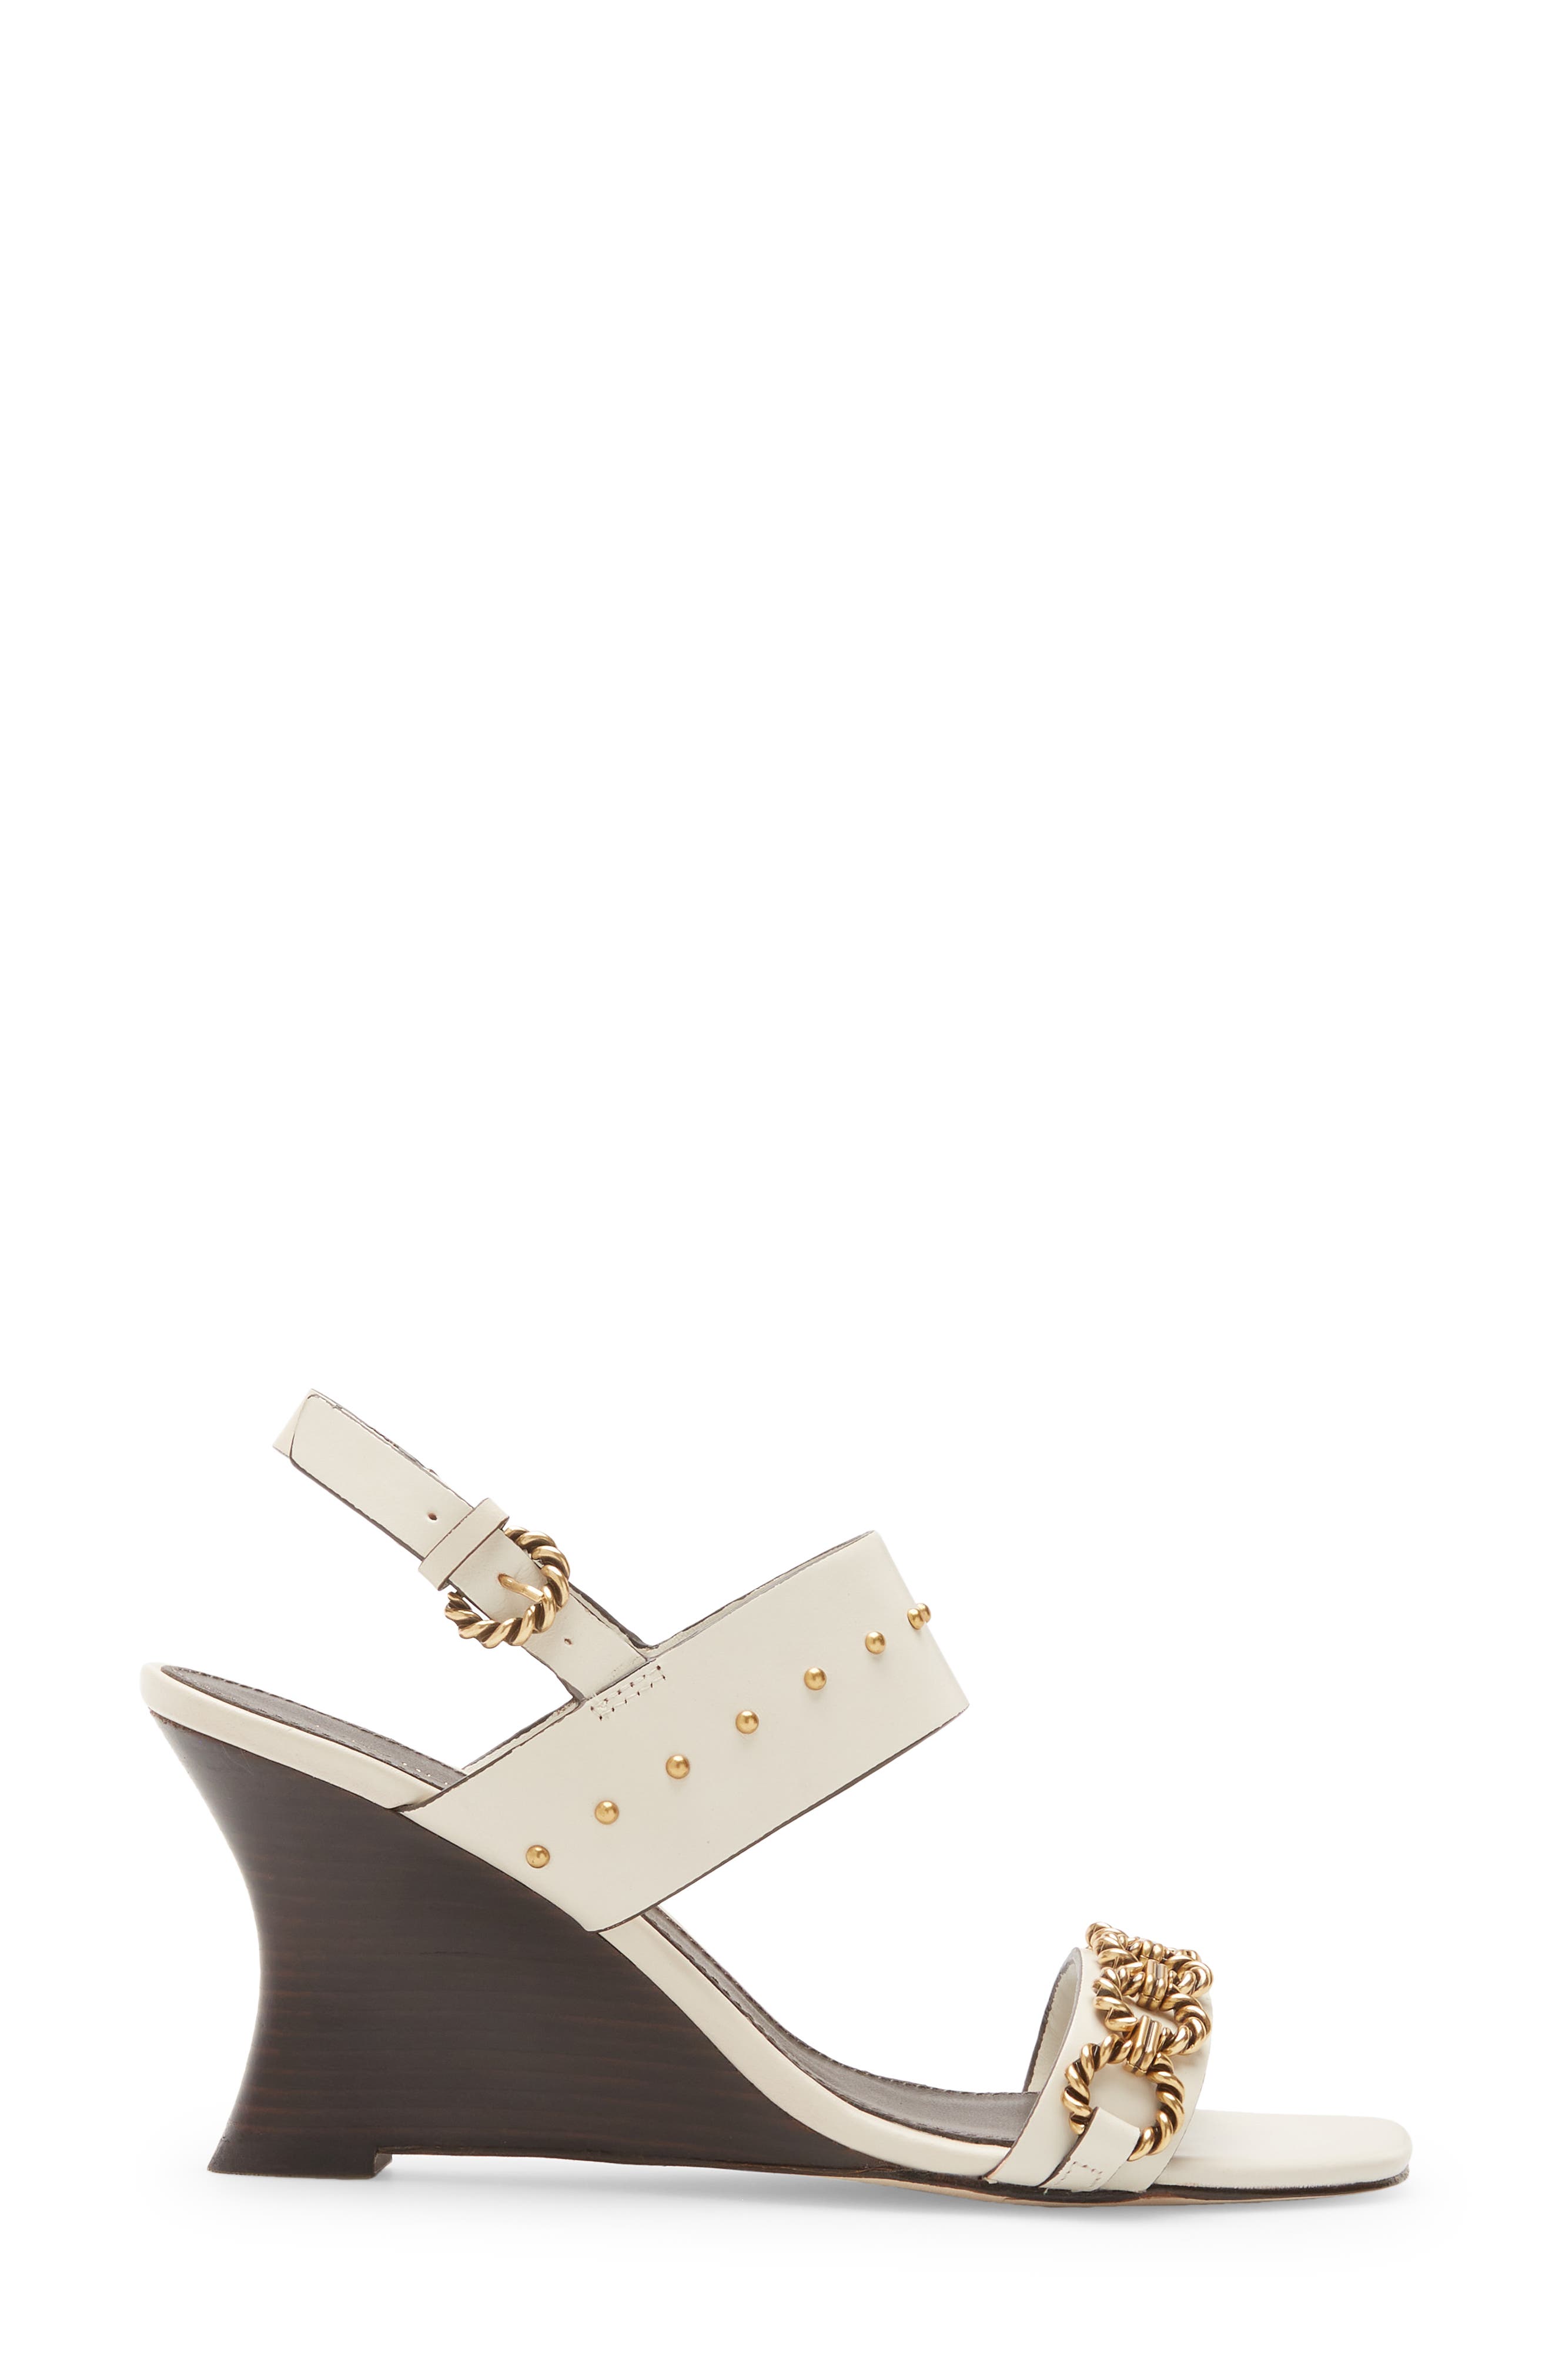 Tory Burch Wedge Sandals black-gold-colored themed print elegant Shoes High-Heeled Sandals Wedge Sandals 